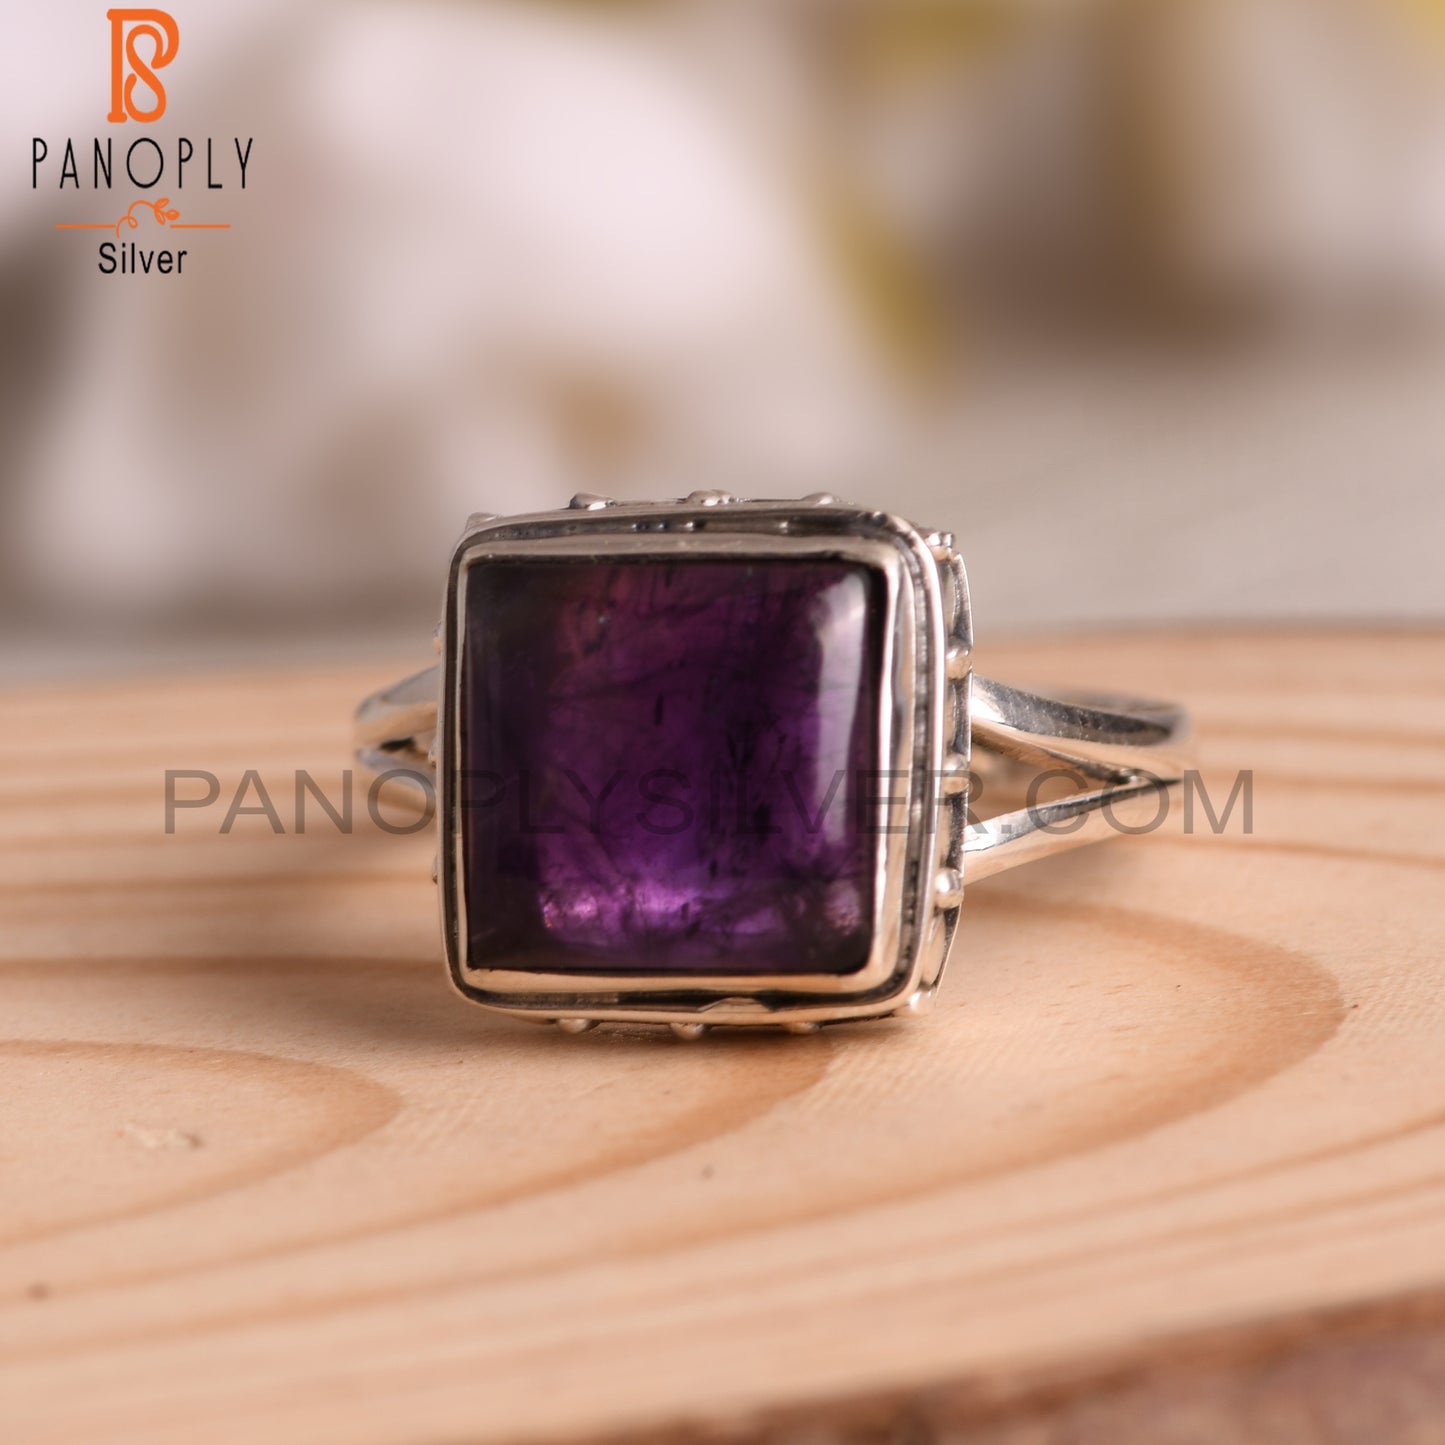 Square 925 Sterling Silver Amethyst Ring